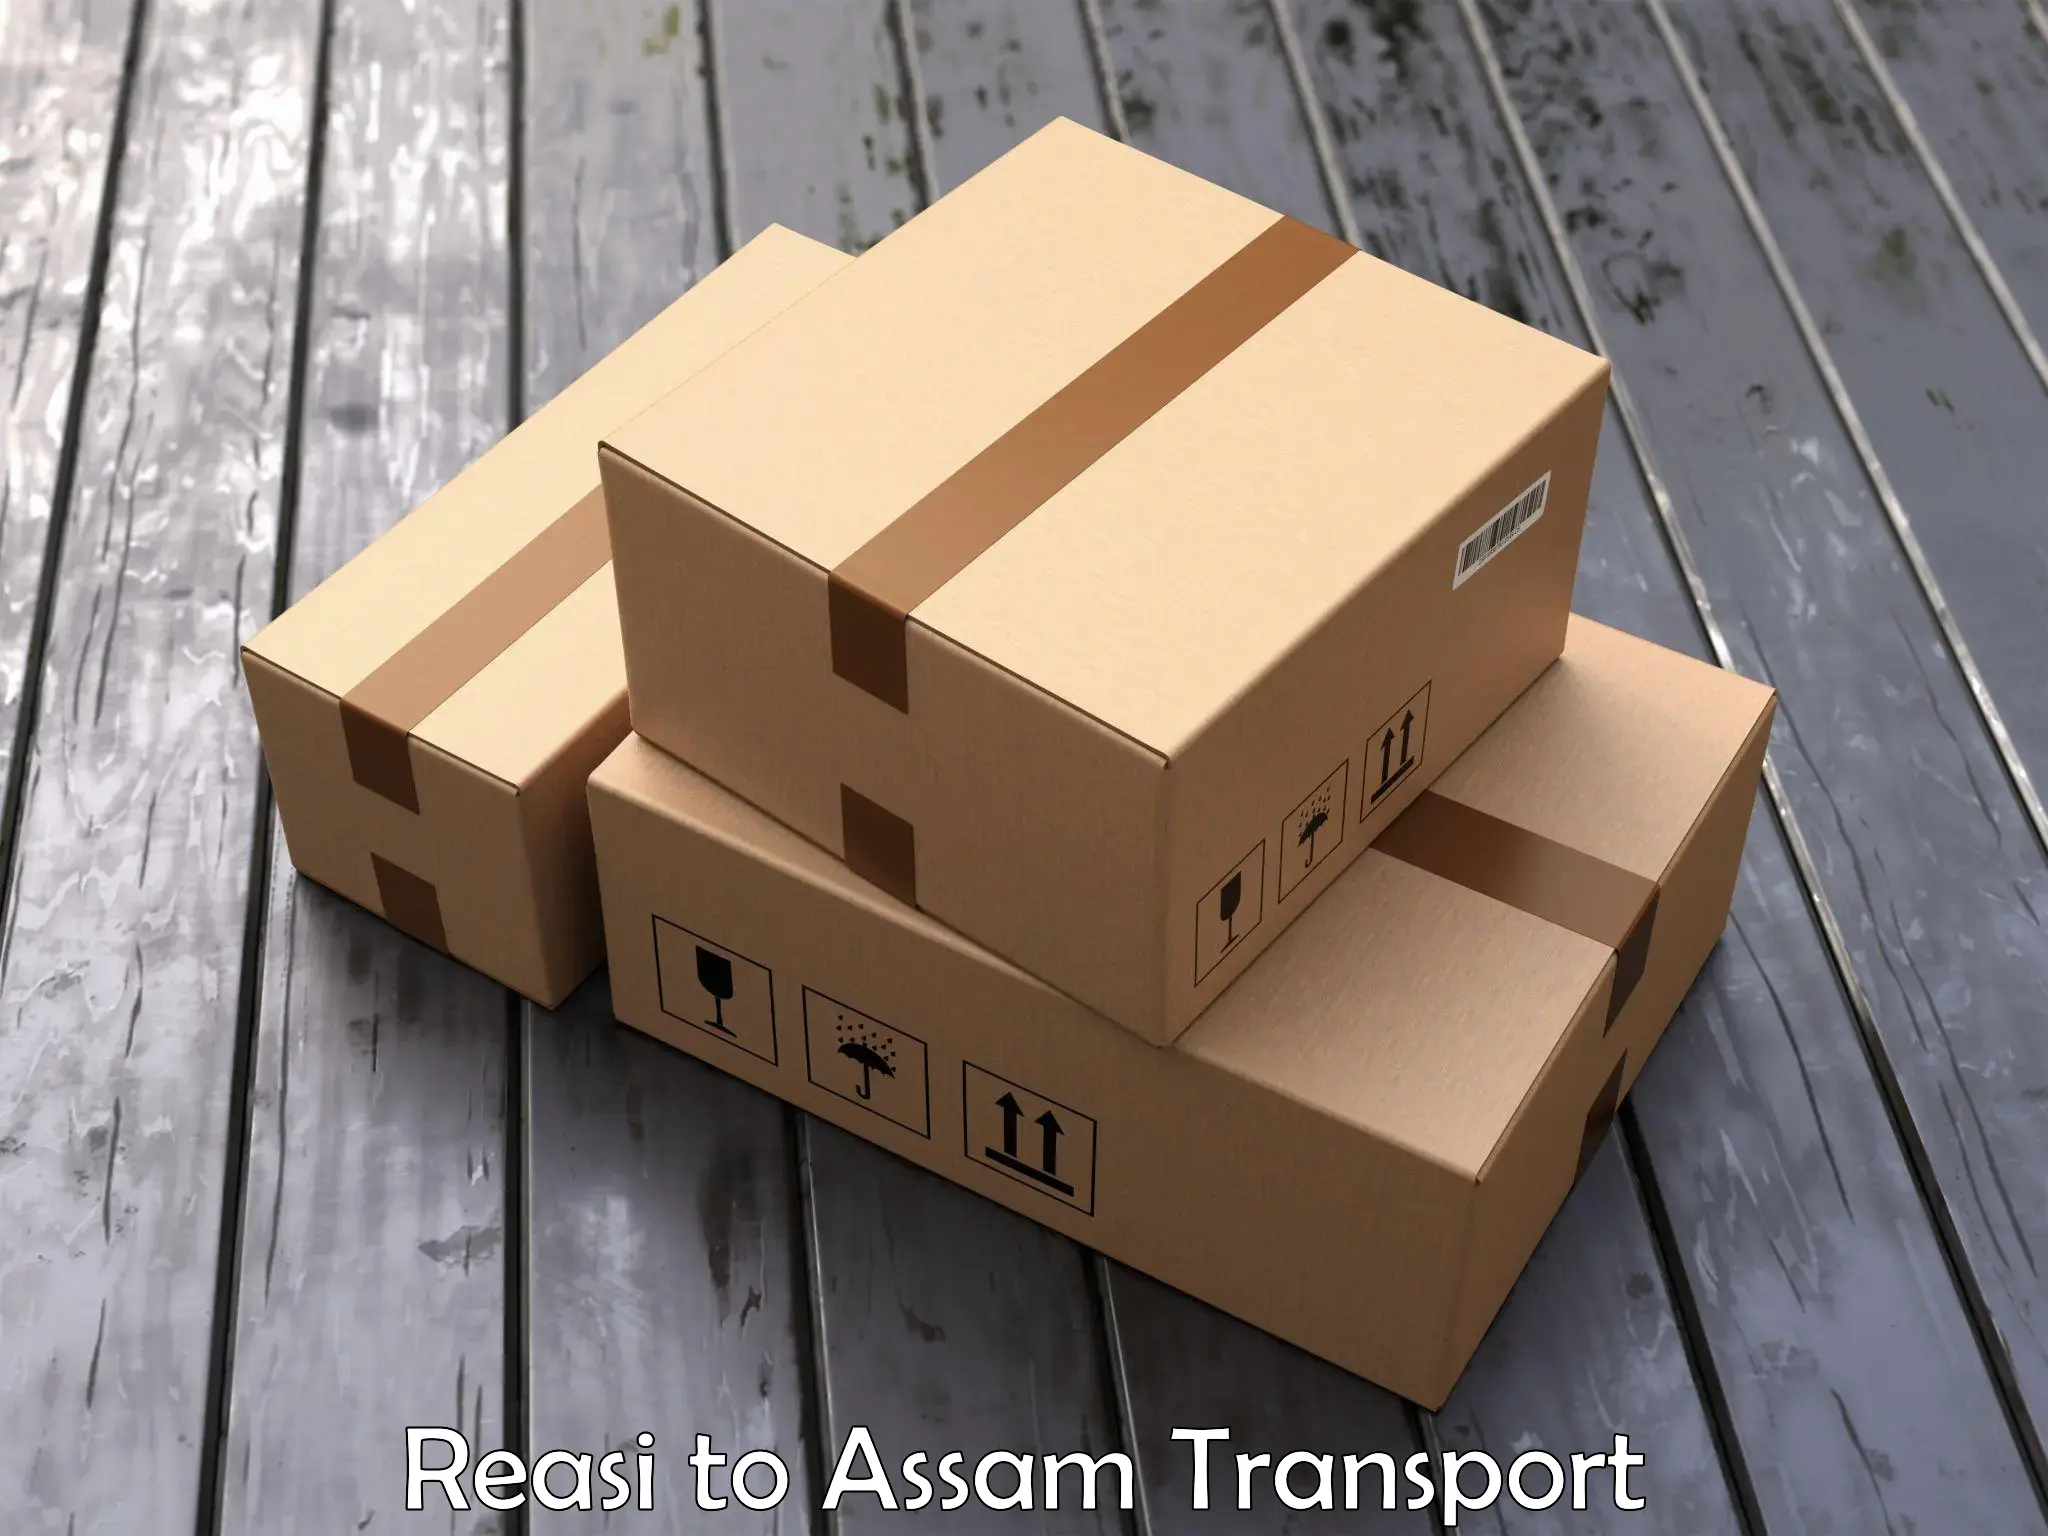 Two wheeler parcel service Reasi to Assam